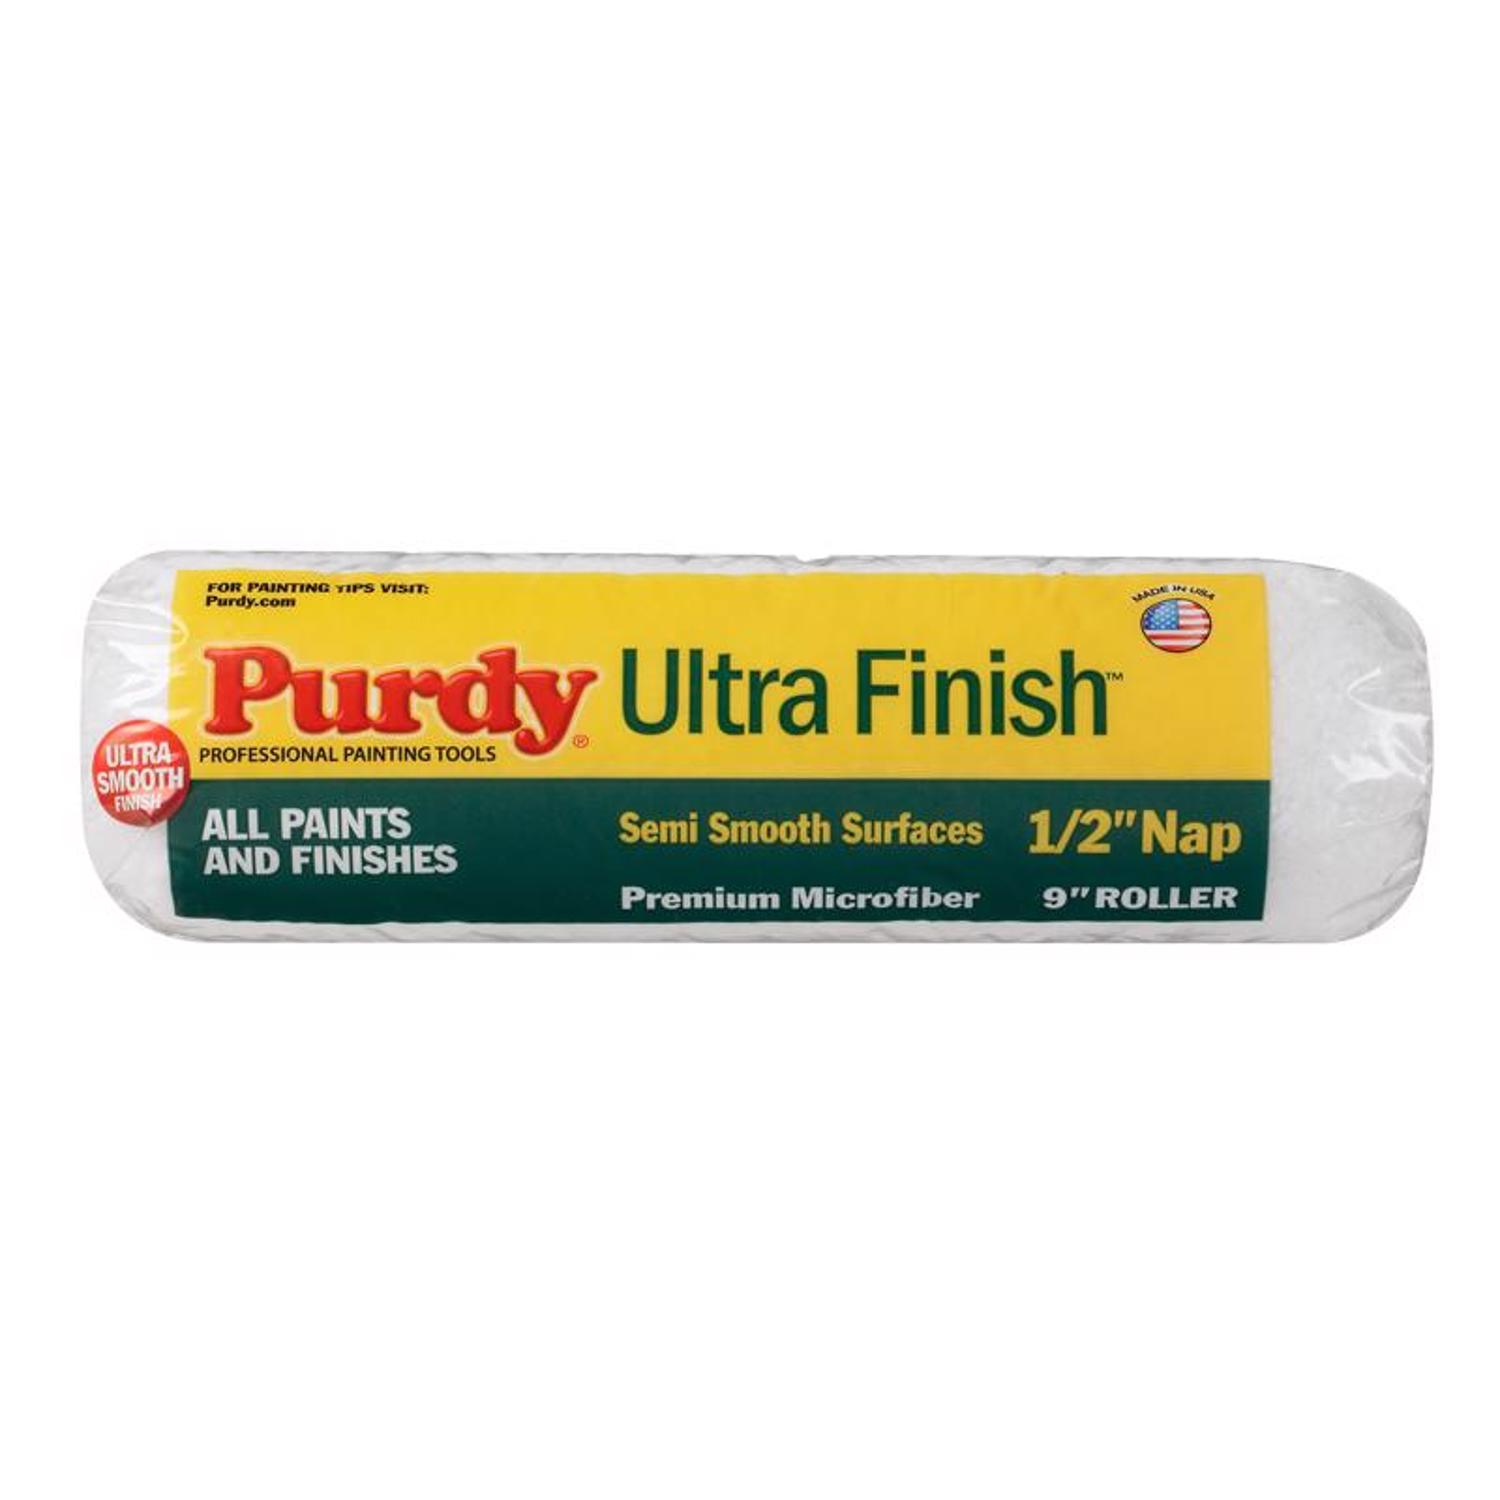 Photos - Putty Knife / Painting Tool Purdy Ultra Finish Microfiber 9 in. W X 1/2 in. Regular Paint Roller Cover